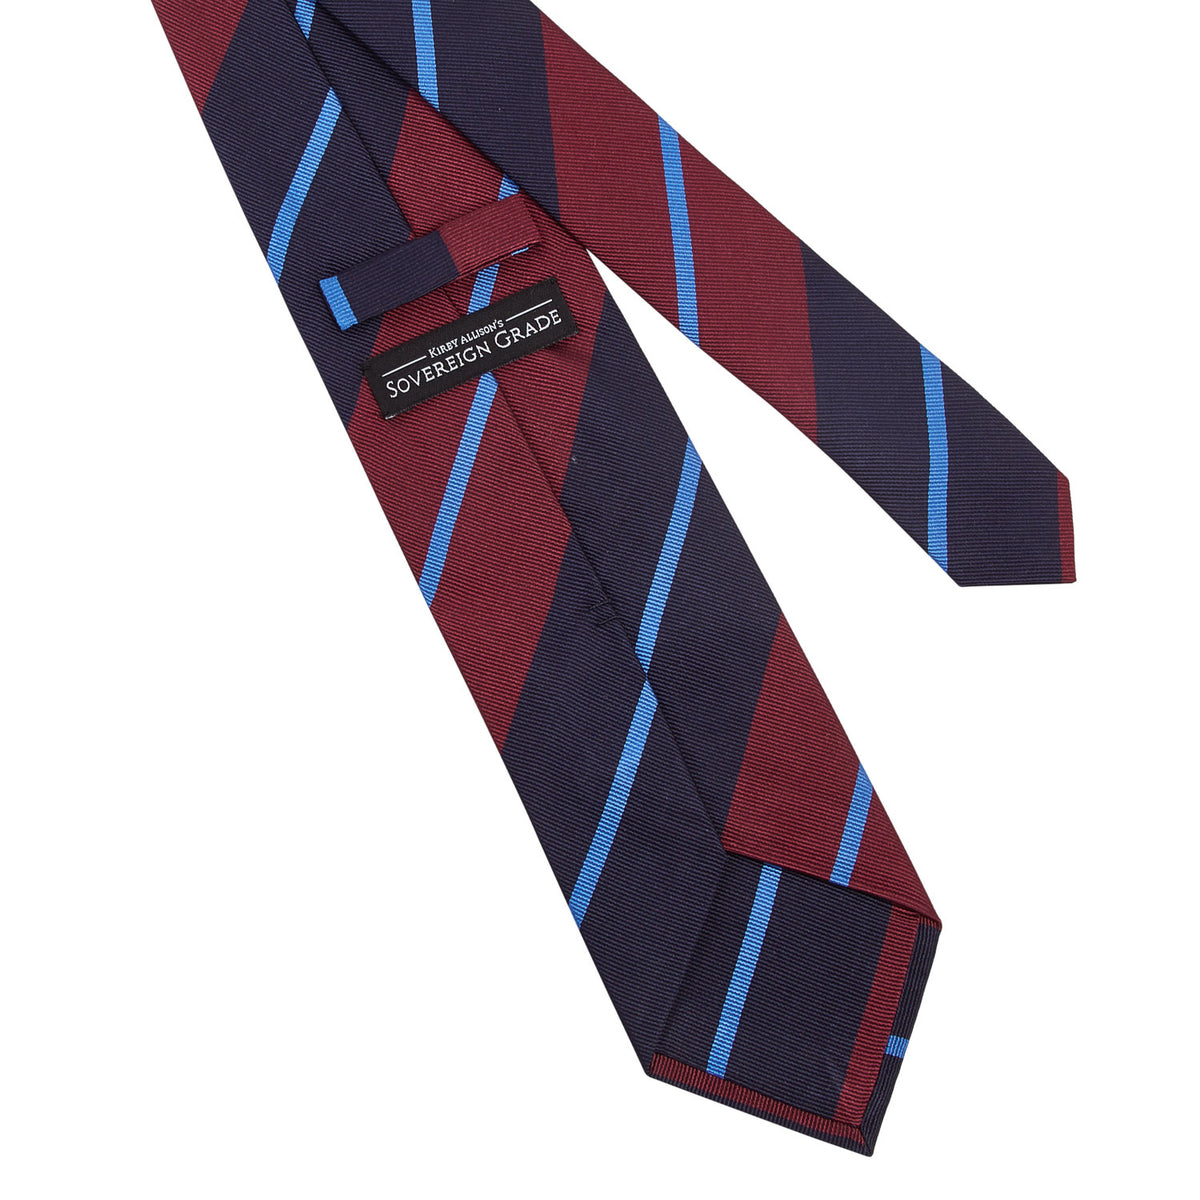 A high-quality Sovereign Grade Navy/Burgundy Rep Tie with blue and red stripes on a white background from KirbyAllison.com.